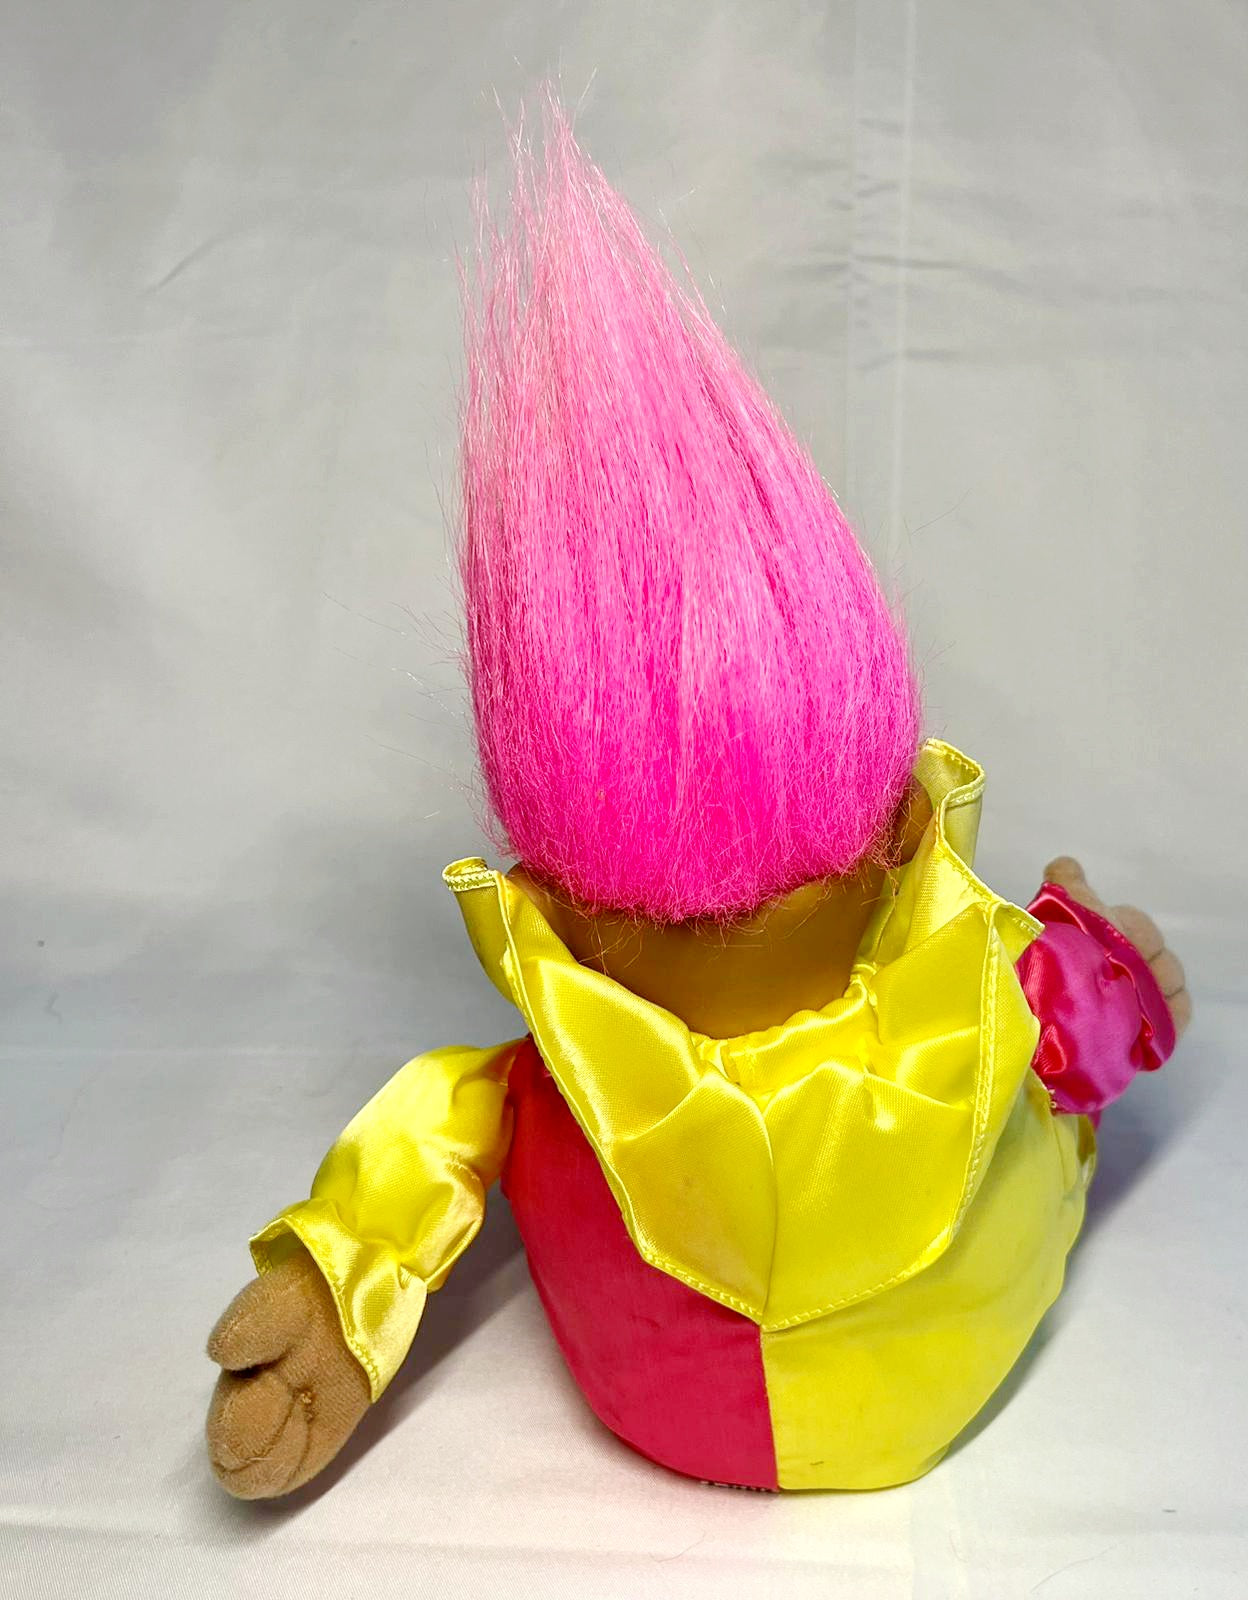 Cute *Vintage Russ Clown Troll Doll, “JESTER” Bright Pink & Yellow 10” Plush Toy